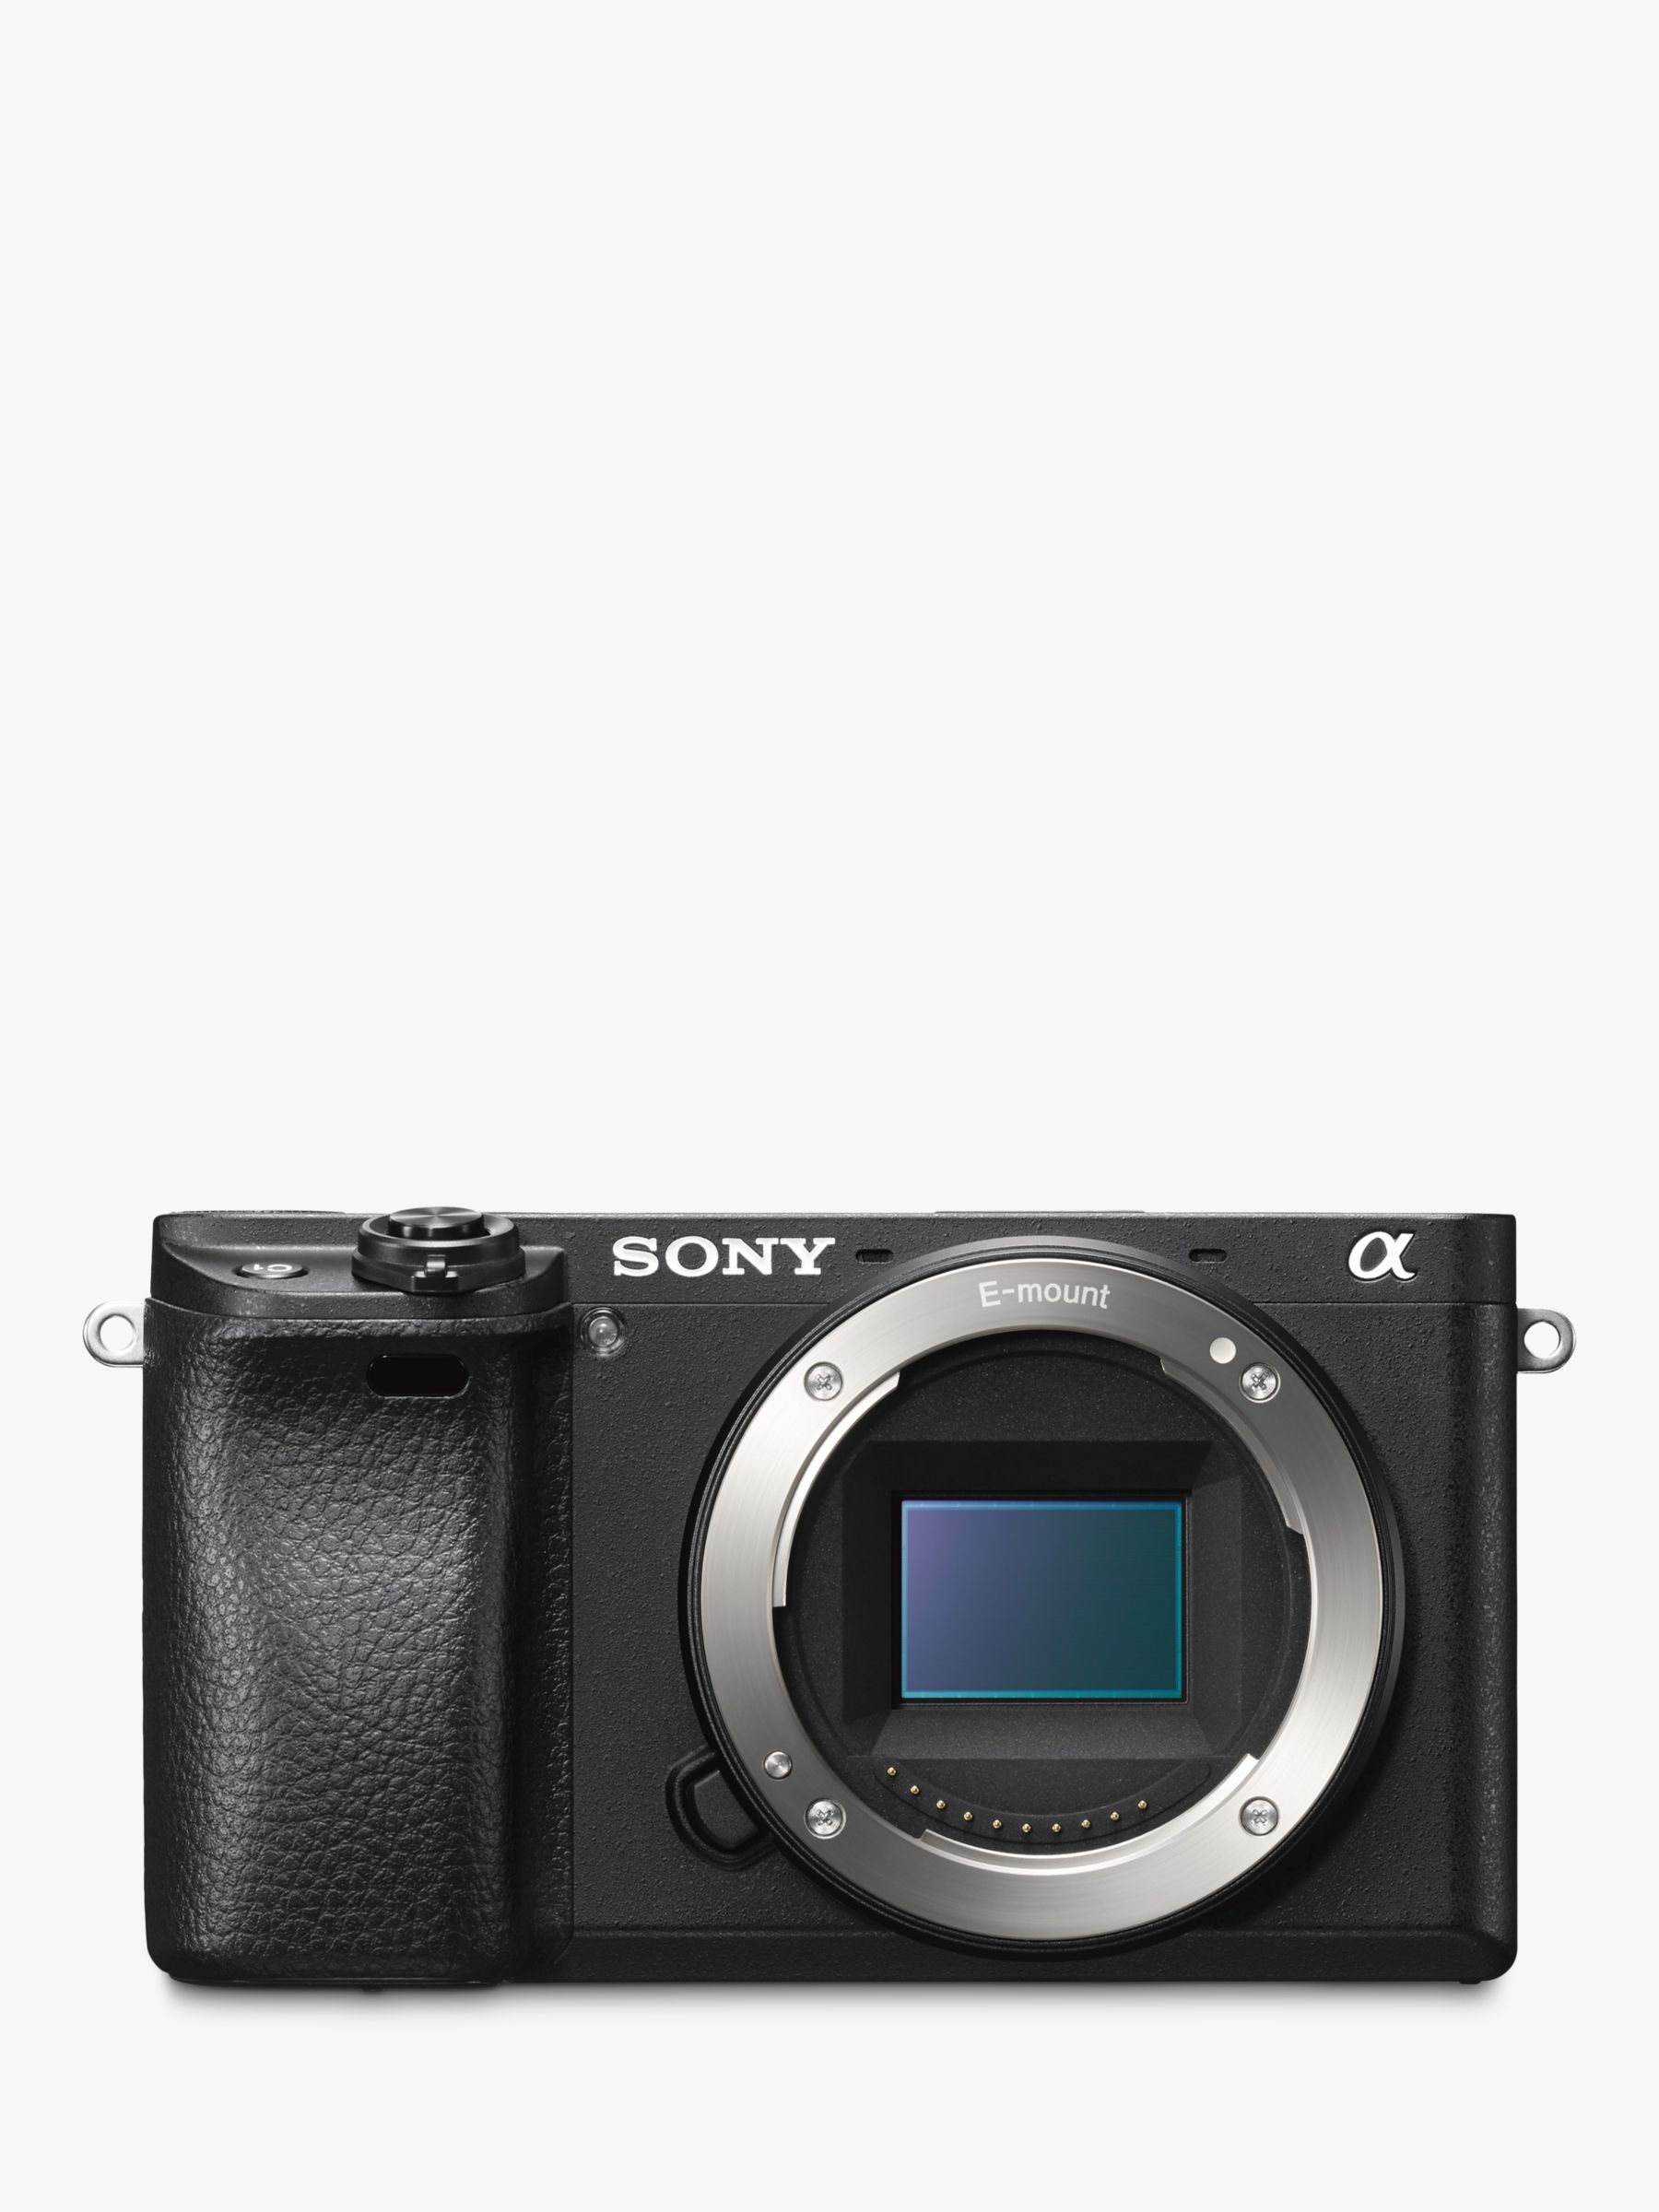 Sony A6300 Compact System Camera 4K Ultra HD, 24.2MP, 4D Focus, Wi-Fi, NFC, OLED EVF, 3 Tilting Screen, Black, Body Only